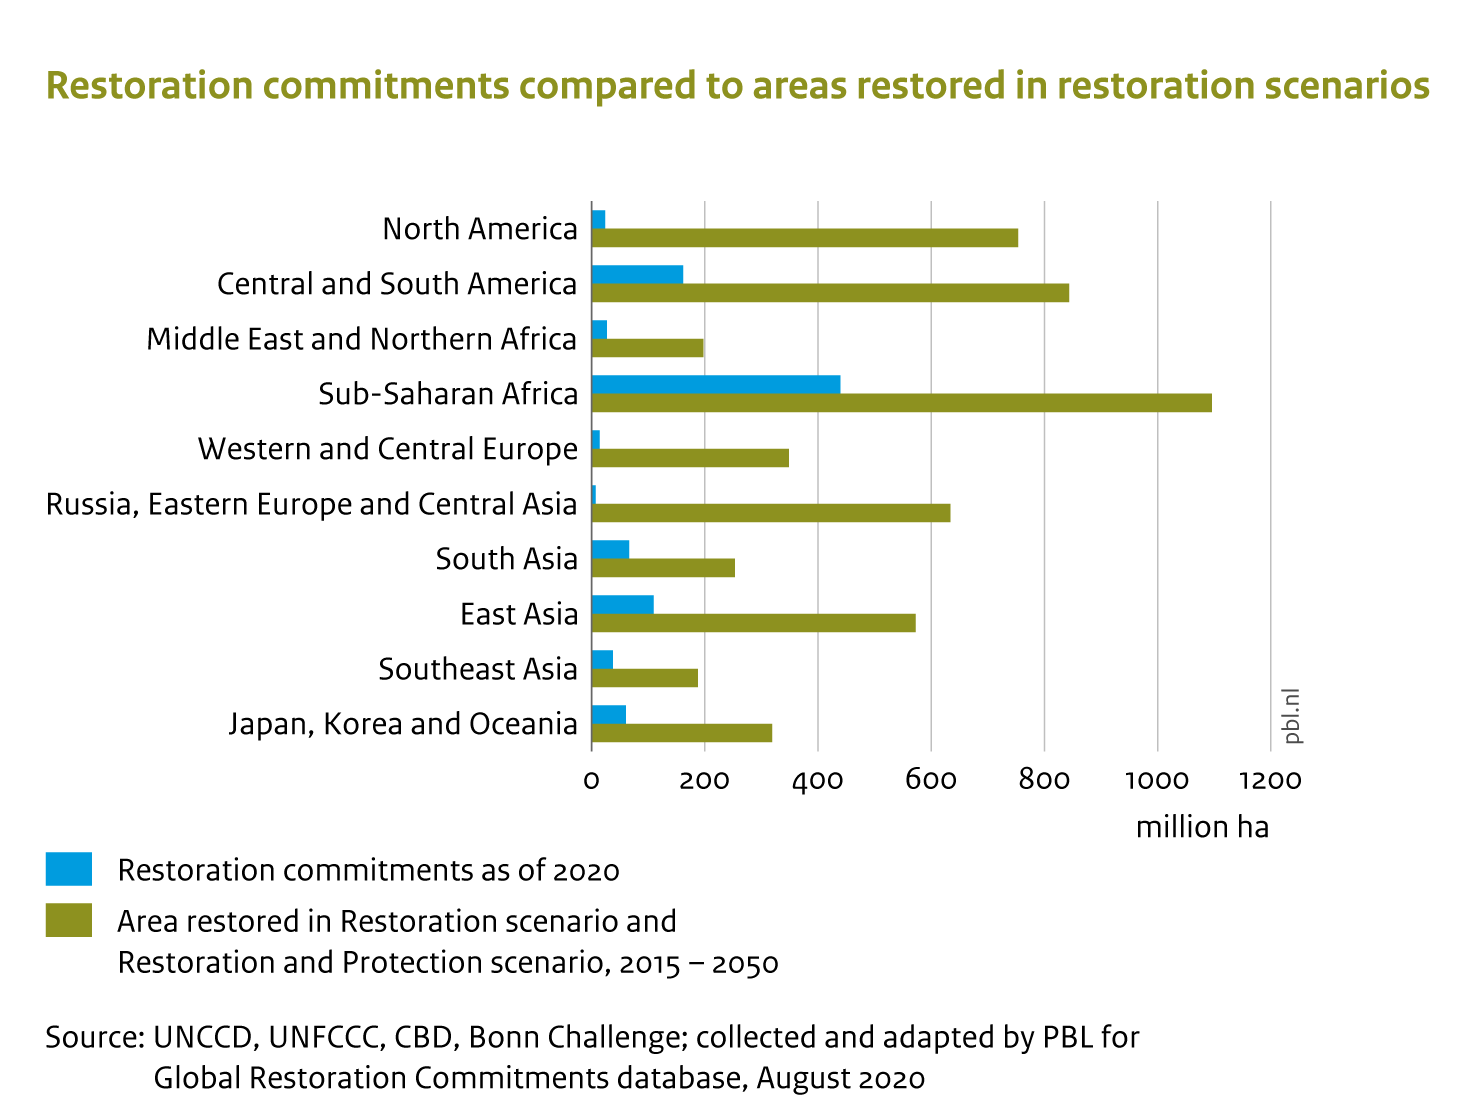 Restoration commitments compared to areas restored in restoration scenarios. Bar chart showing that all global regions have commitments for restoration, that are around 20% of the total area that can be restored in restoration scenarios.